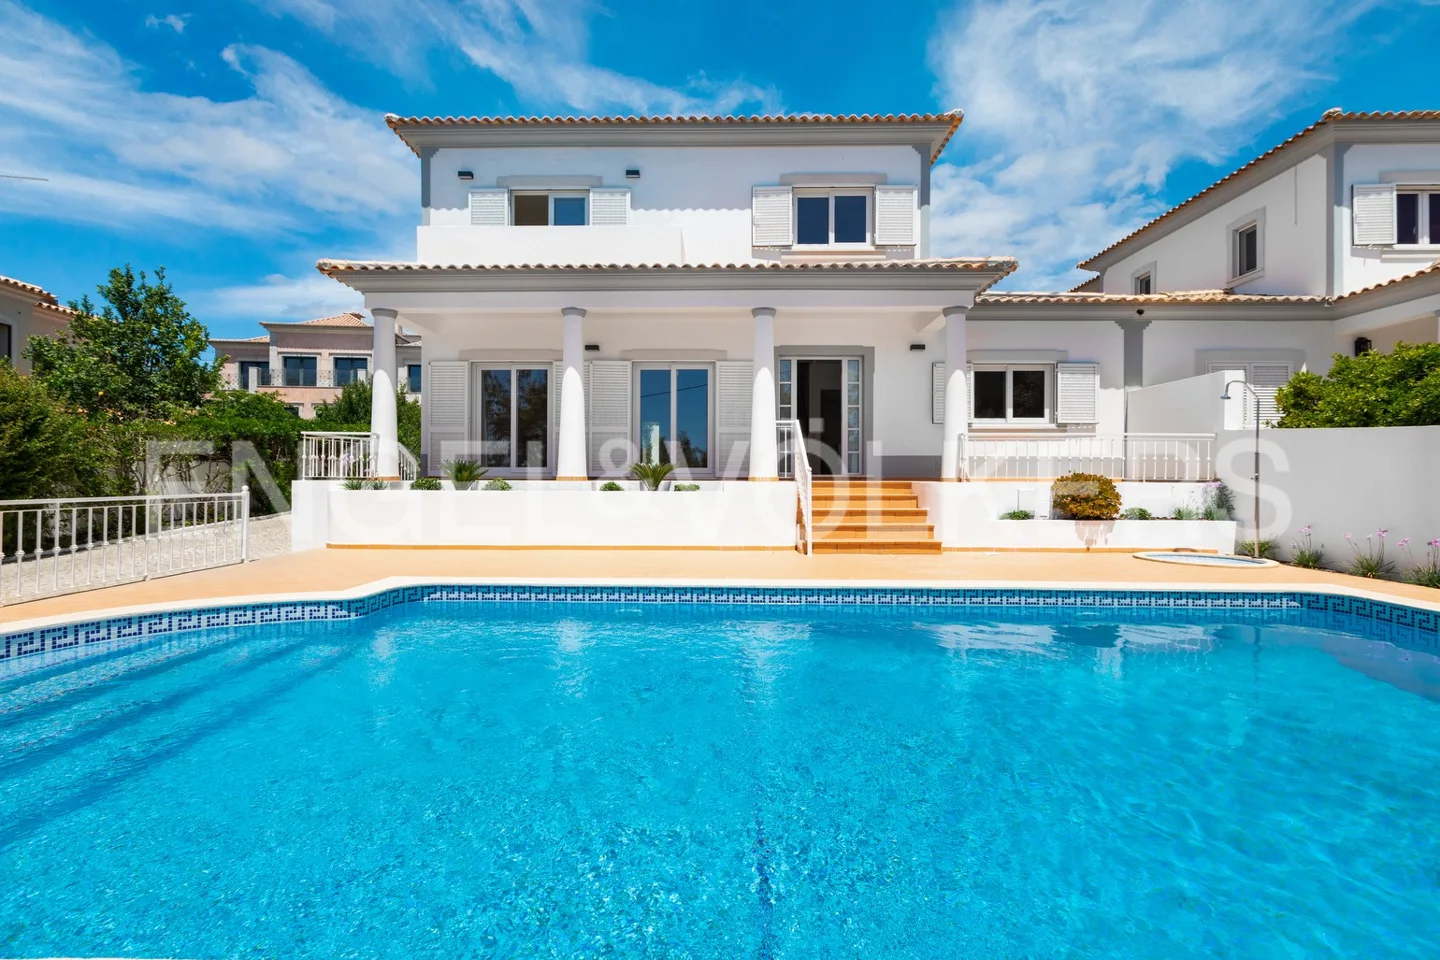 Renovated 4-bedroom Villa with Sea Views in Golden Triangle